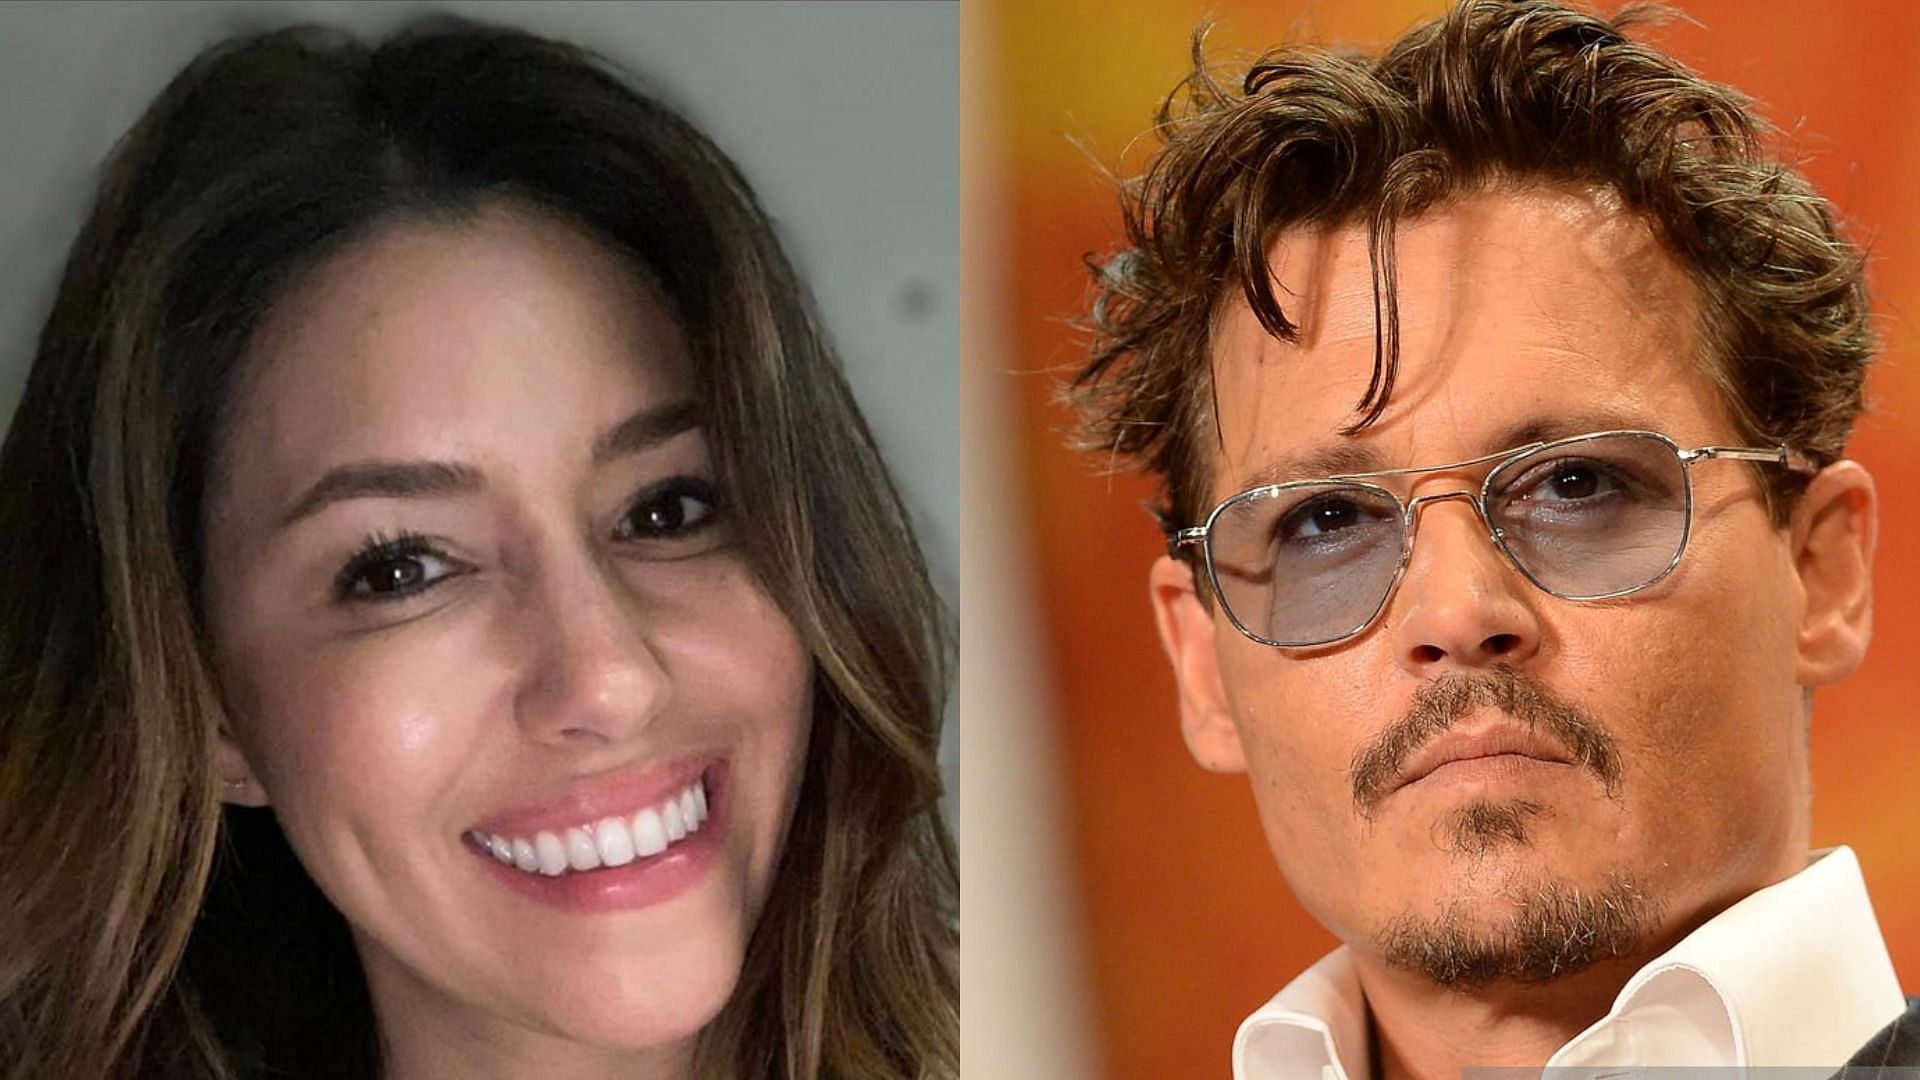 Sources confirmed that Johnny Depp is not dating Camille Vasquez (Images via @camillevasquezofficial/Instagram (left) and Jack McAdoo/Getty Images (right))